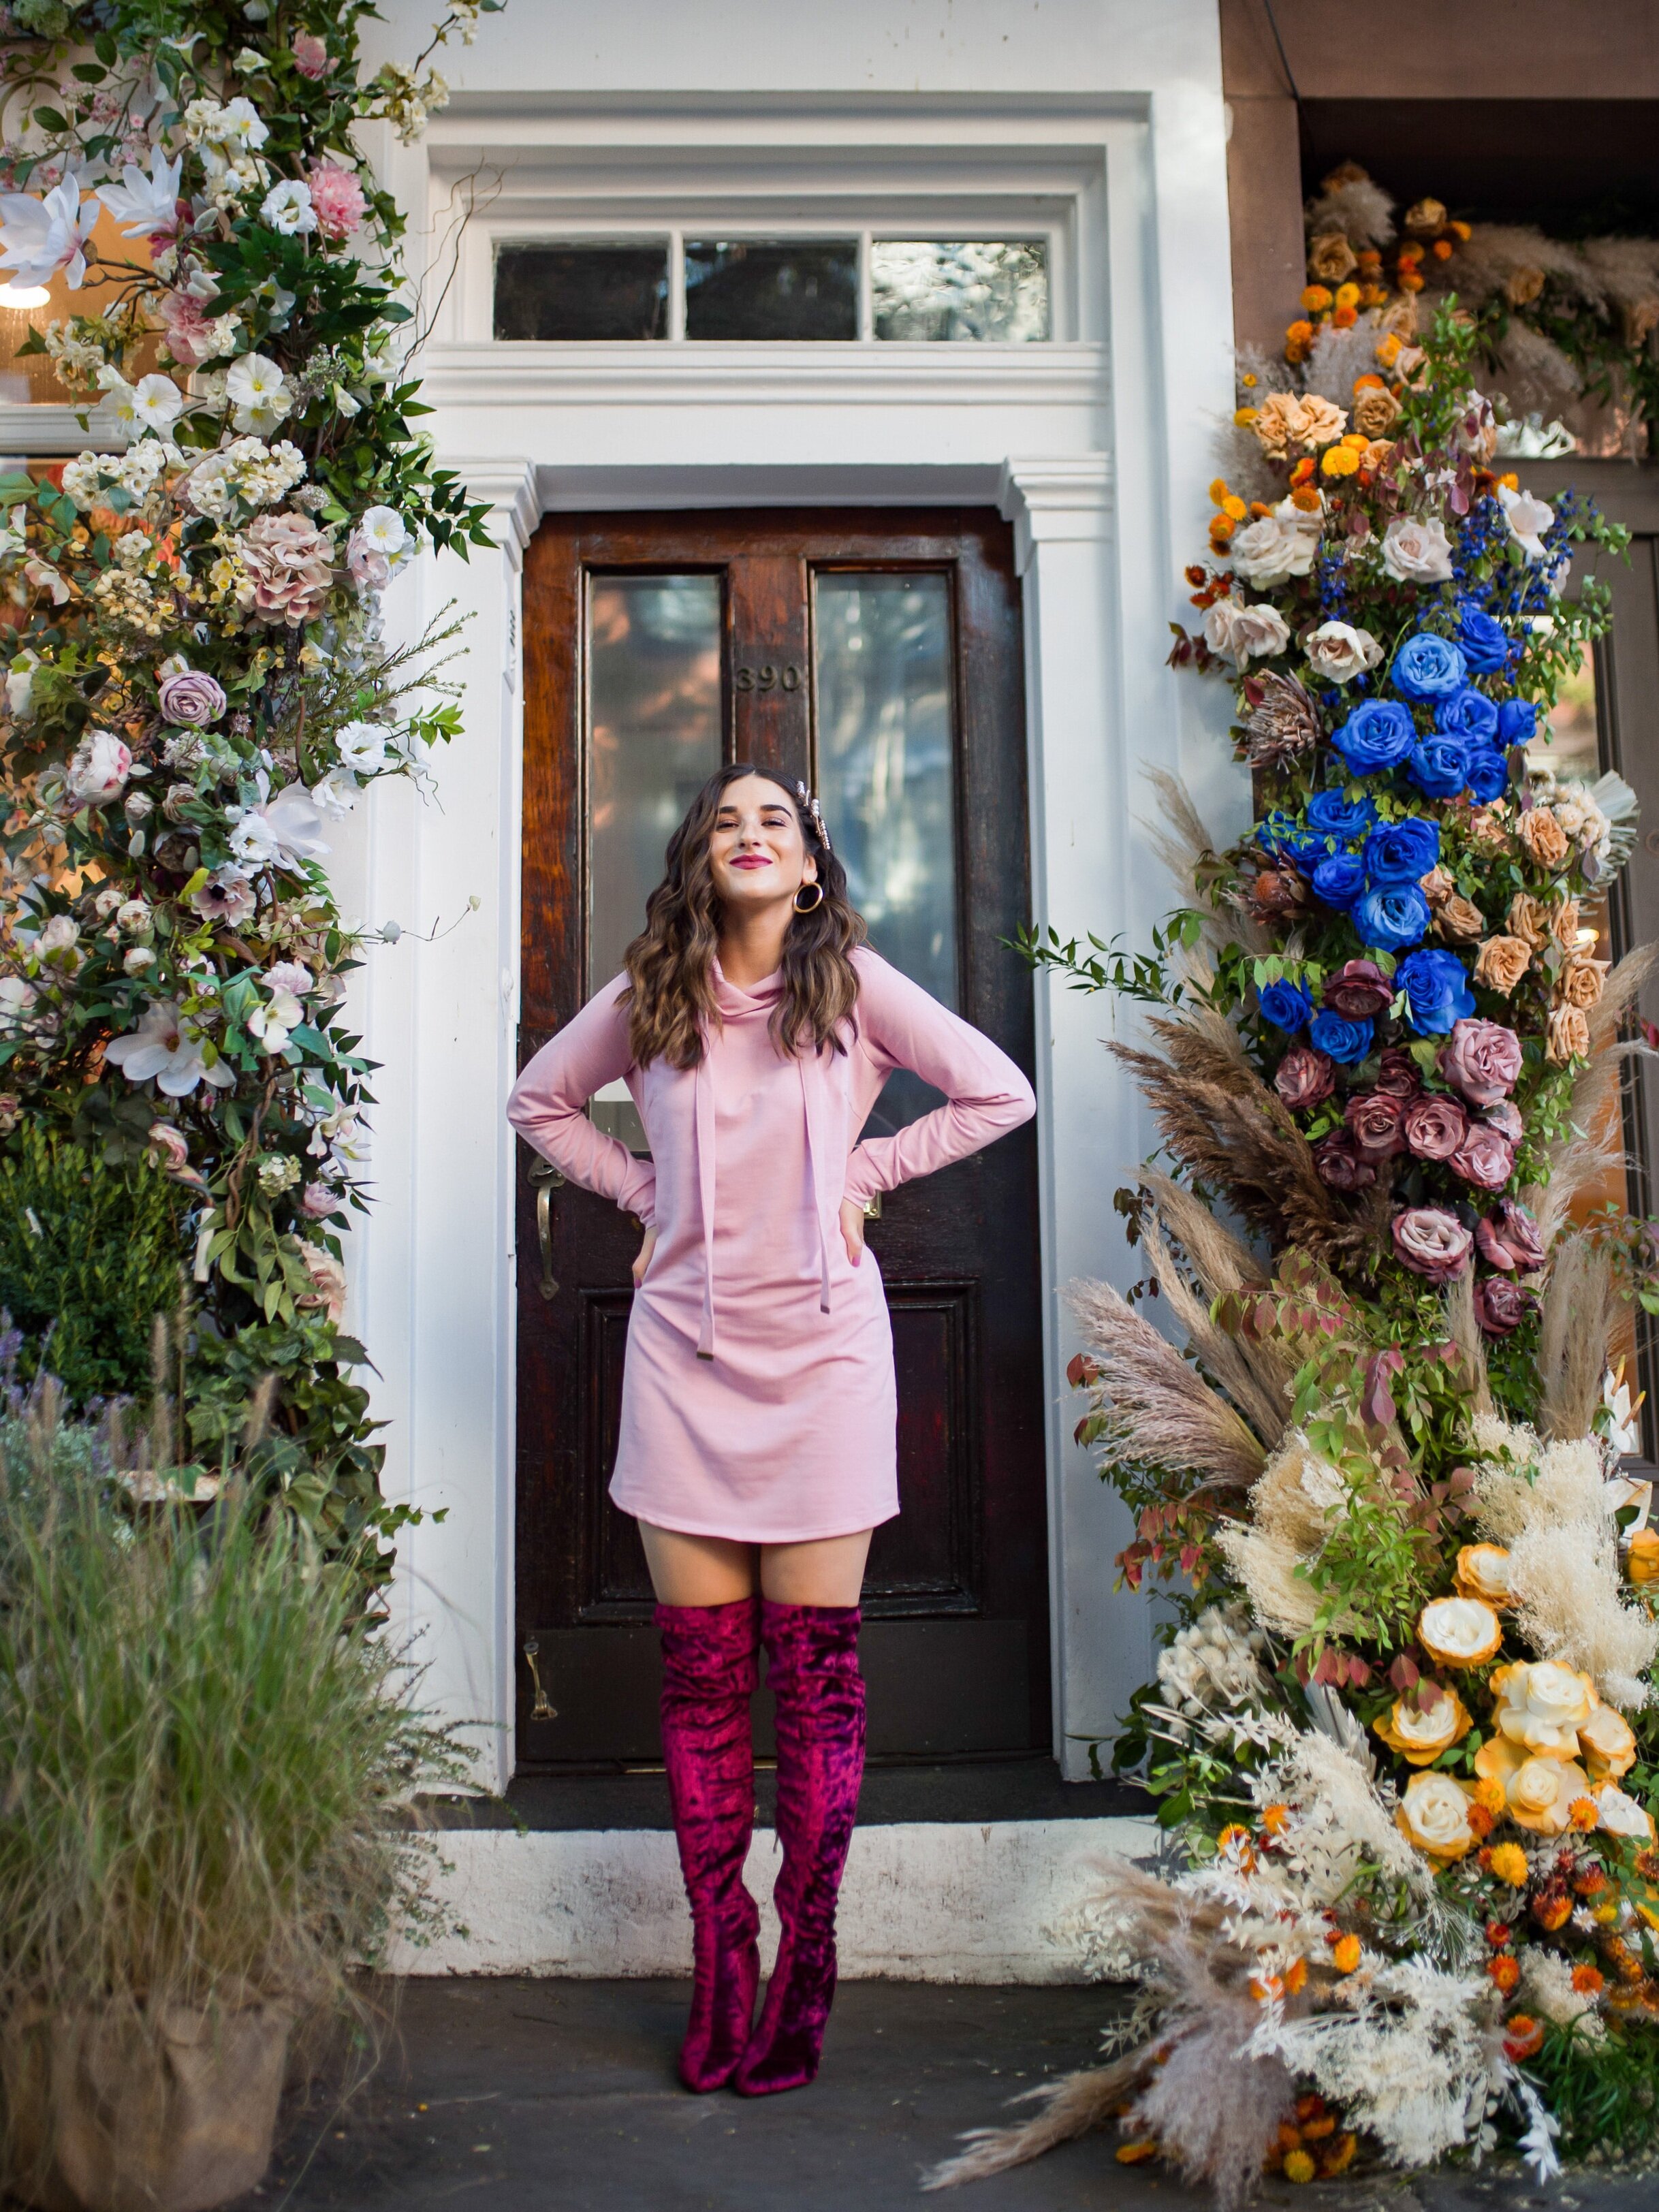 Pink Sweatshirt Dress Velvet OTK Boots Walmart Fashion Esther Santer Fashion Blog NYC Street Style Blogger Outfit OOTD Trendy Shopping Girl What How To Wear Hair Accessories Jewel Clips Fall Winter Styling Maroon Shoes Floral Backdrop Steal Affordable.jpg